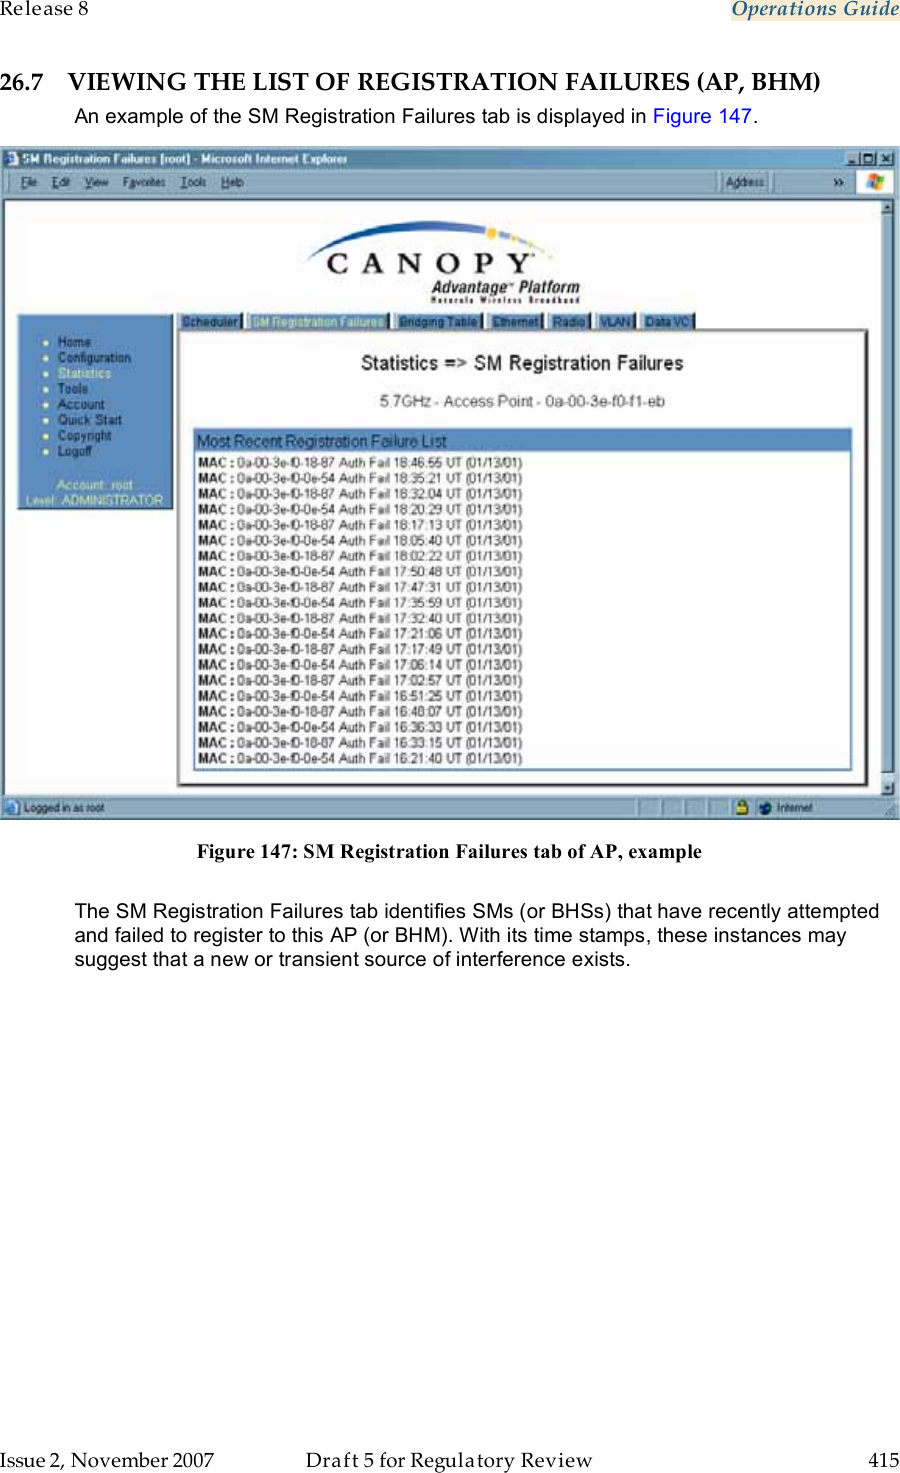 Release 8    Operations Guide   Issue 2, November 2007  Draft 5 for Regulatory Review  415     26.7 VIEWING THE LIST OF REGISTRATION FAILURES (AP, BHM) An example of the SM Registration Failures tab is displayed in Figure 147.  Figure 147: SM Registration Failures tab of AP, example  The SM Registration Failures tab identifies SMs (or BHSs) that have recently attempted and failed to register to this AP (or BHM). With its time stamps, these instances may suggest that a new or transient source of interference exists. 